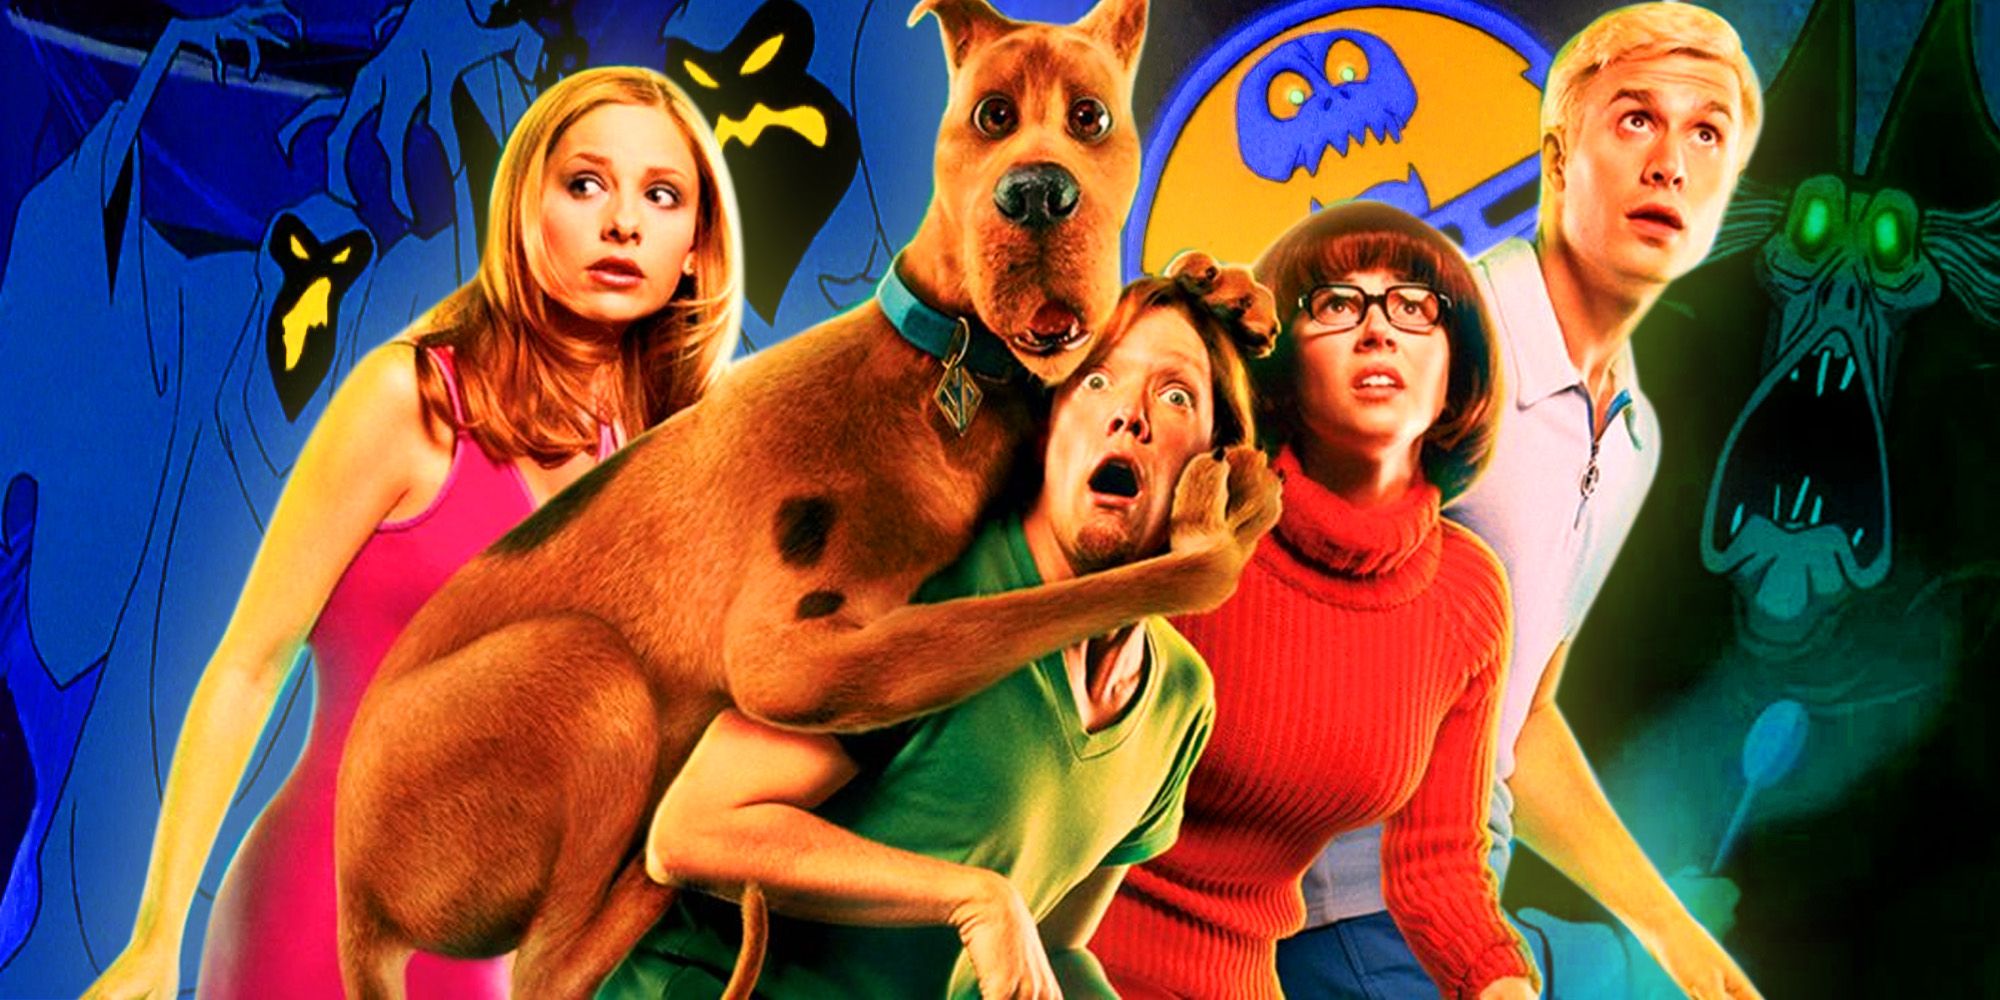 Mystery Inc gang and Scooby-Doo looking scared with cartoon ghosts and monsters behind them